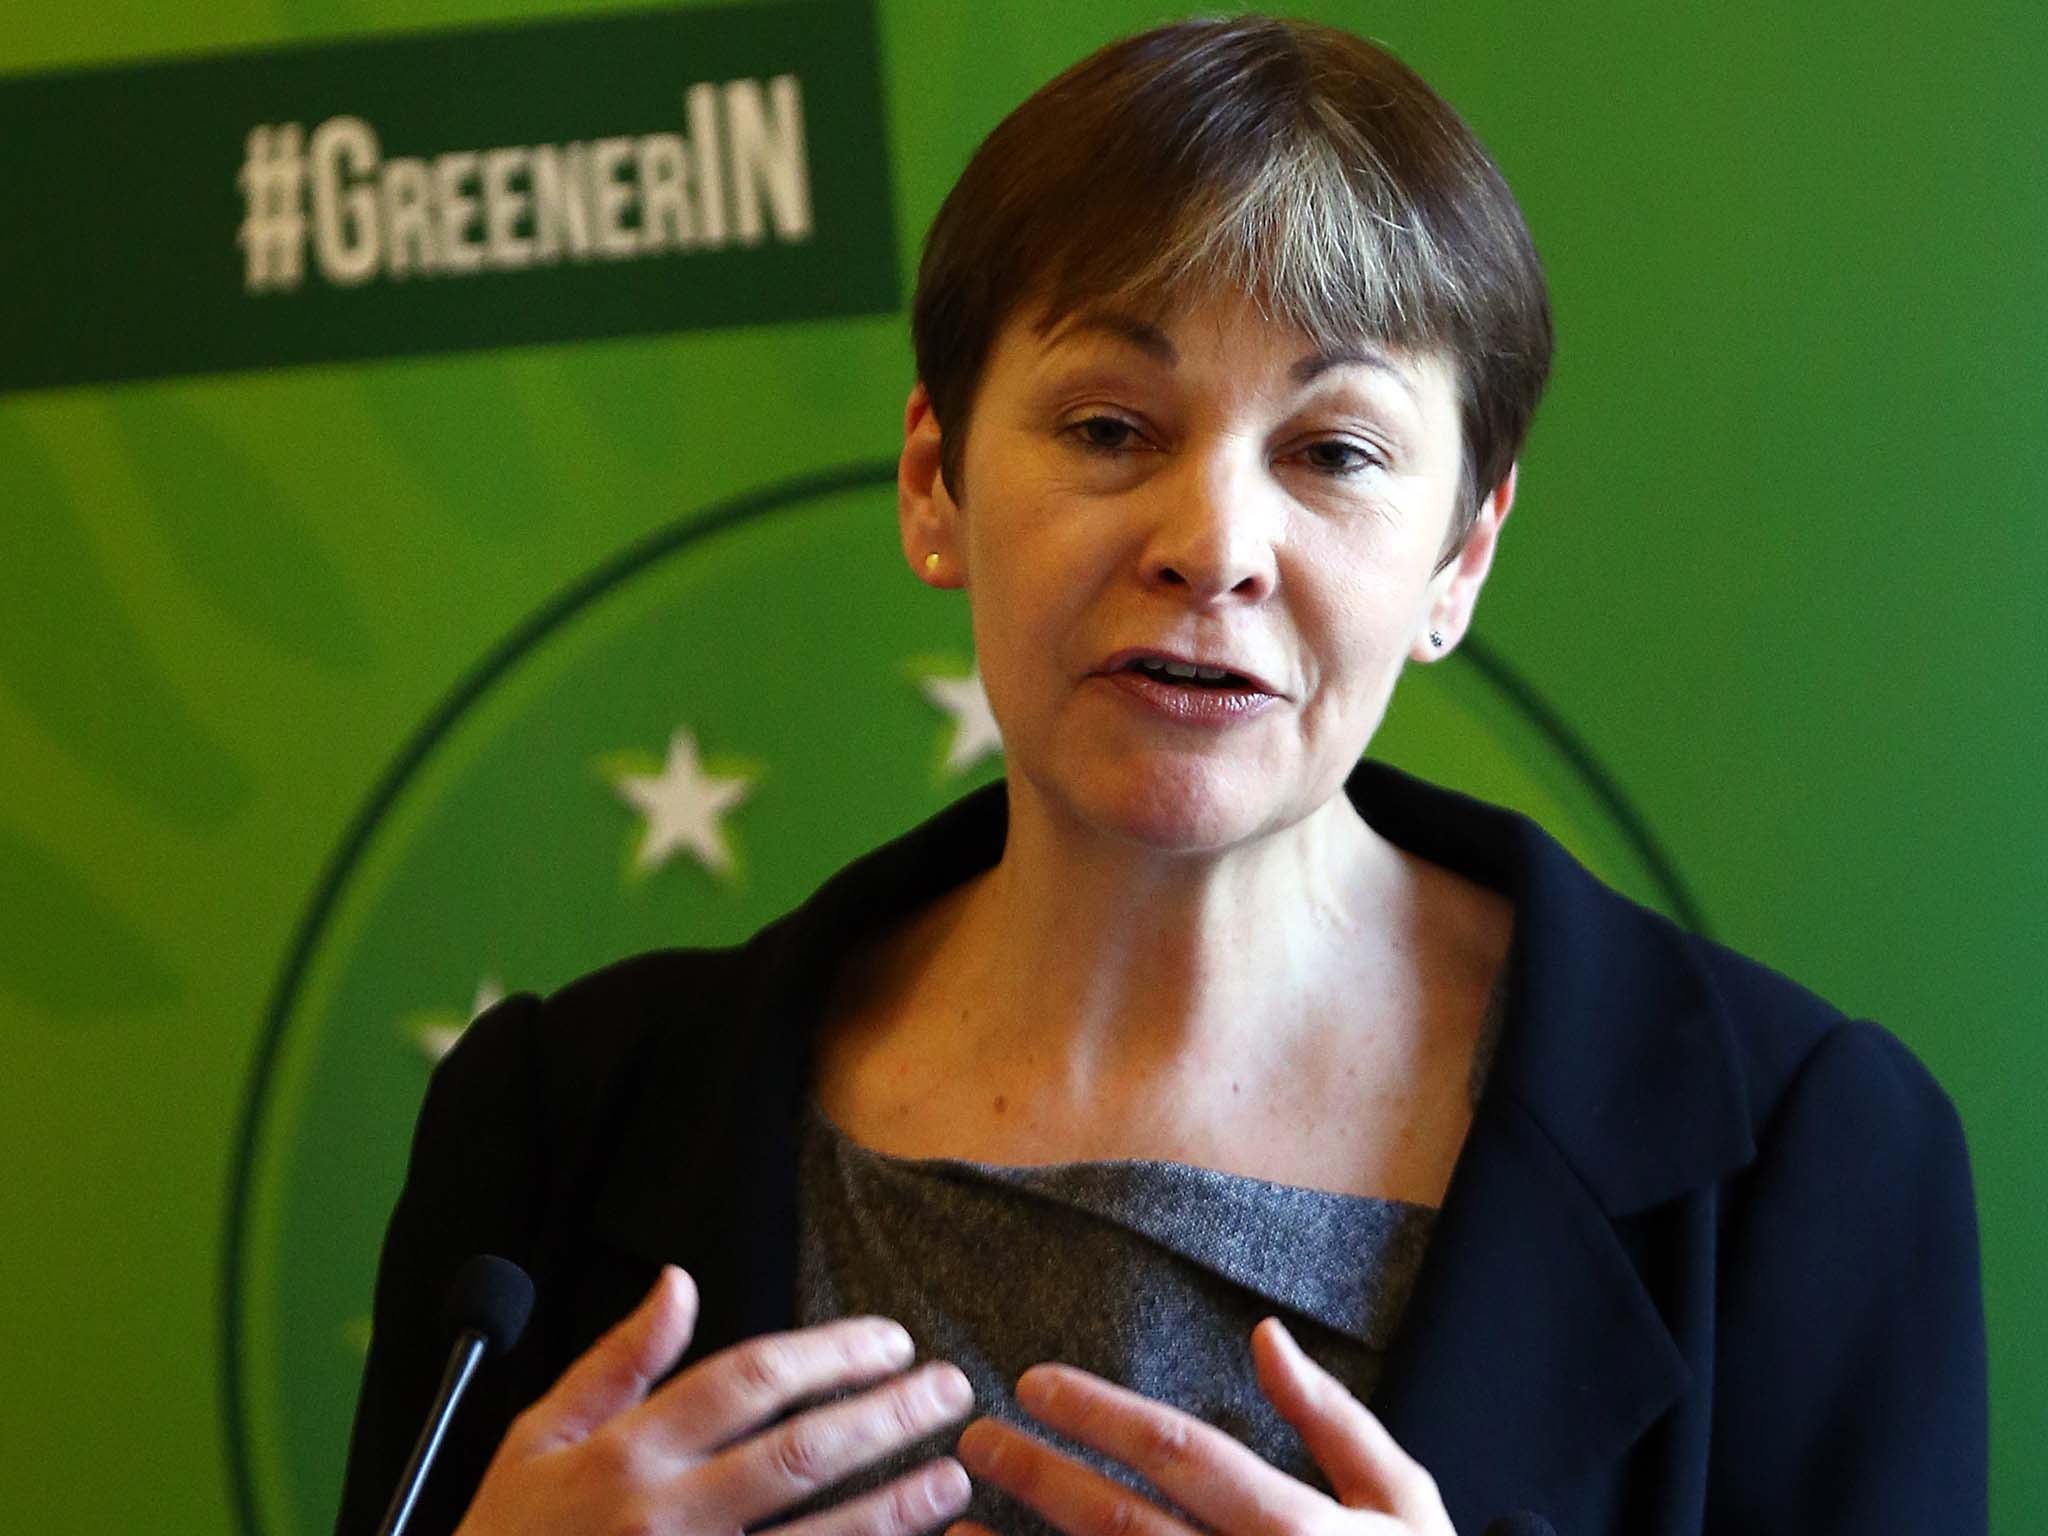 ‘We the people should continue to have our say’, according to Green Party leader Caroline Lucas